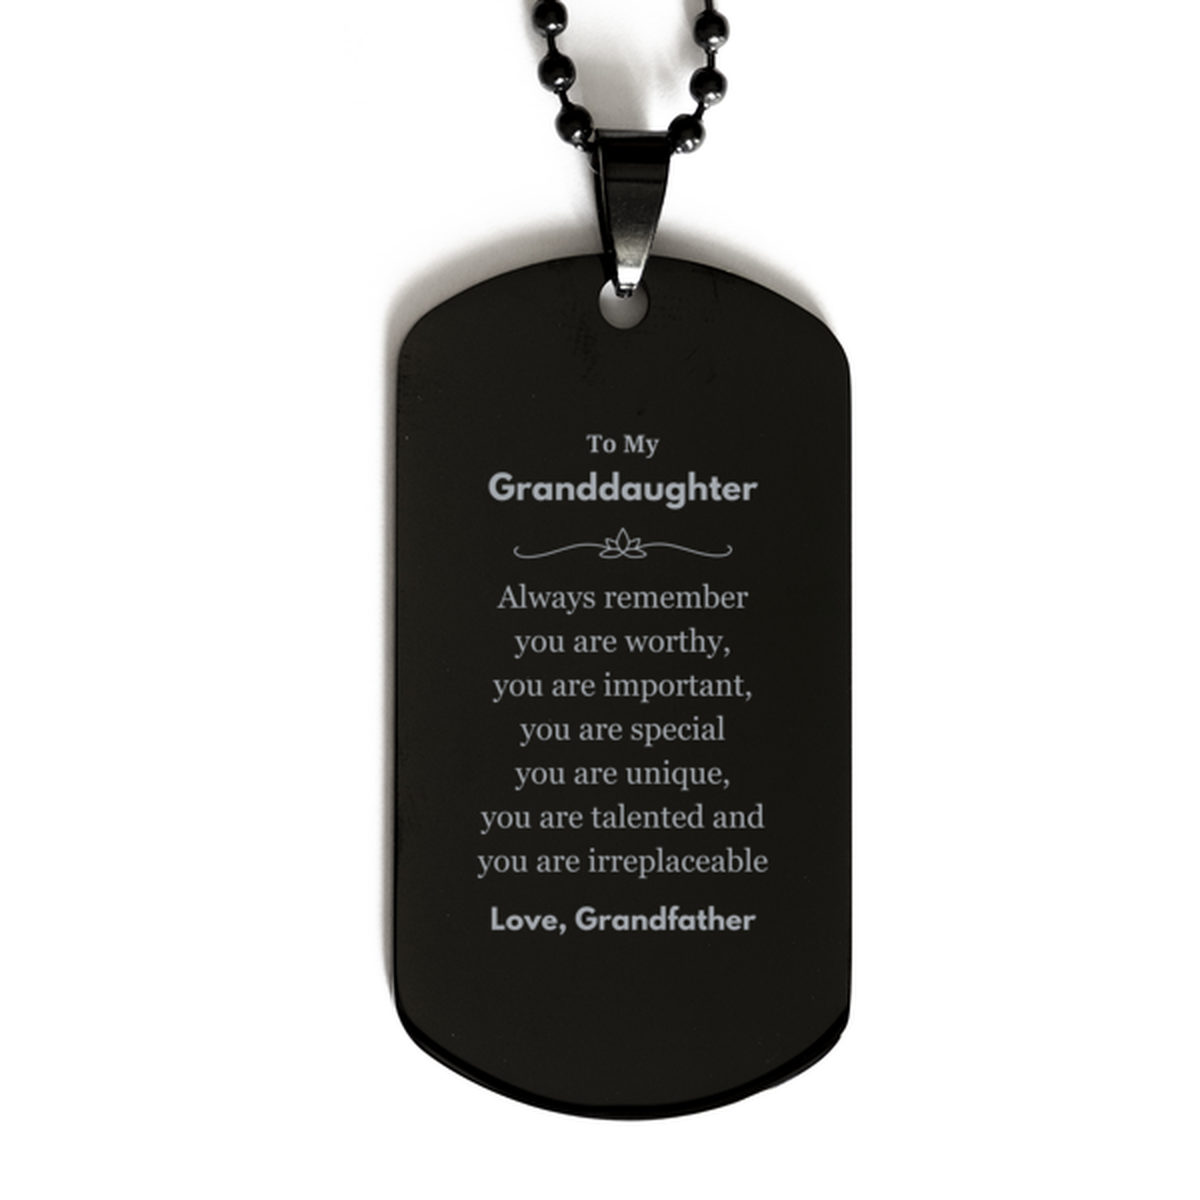 Granddaughter Birthday Gifts from Grandfather, Inspirational Black Dog Tag for Granddaughter Christmas Graduation Gifts for Granddaughter Always remember you are worthy, you are important. Love, Grandfather